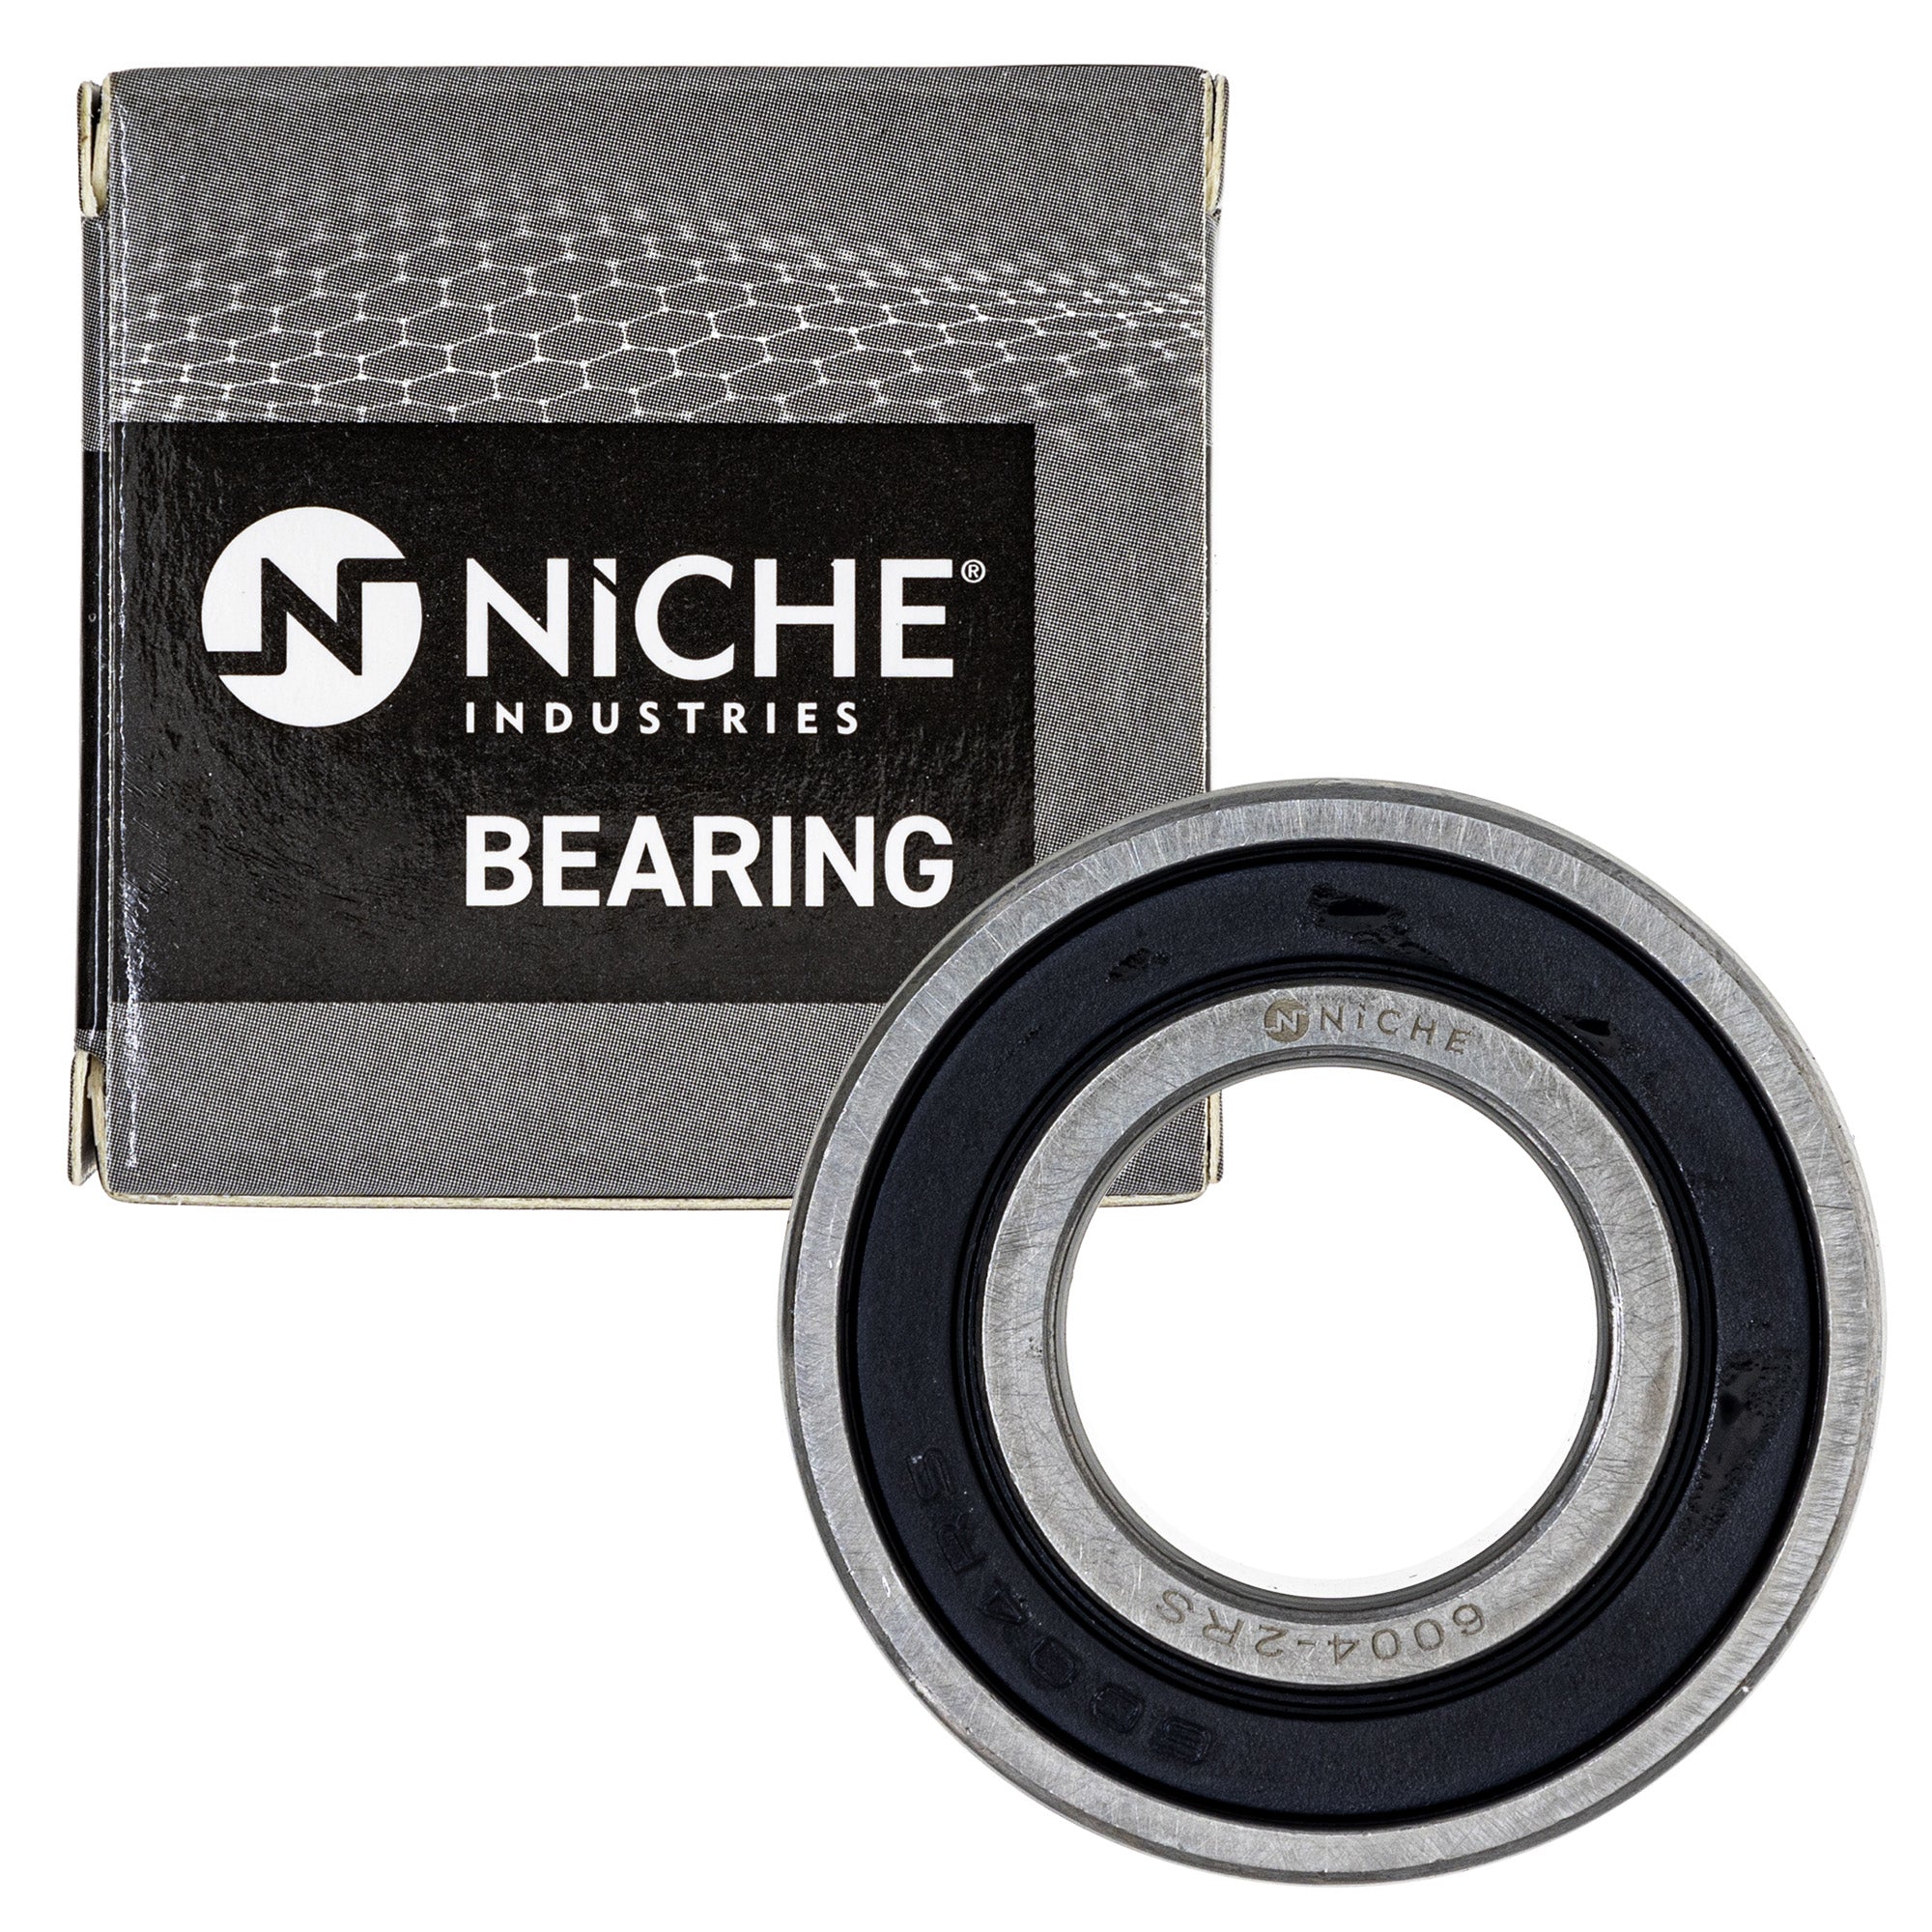 NICHE MK1009130 Wheel Bearing Seal Kit for zOTHER Ref No RM250